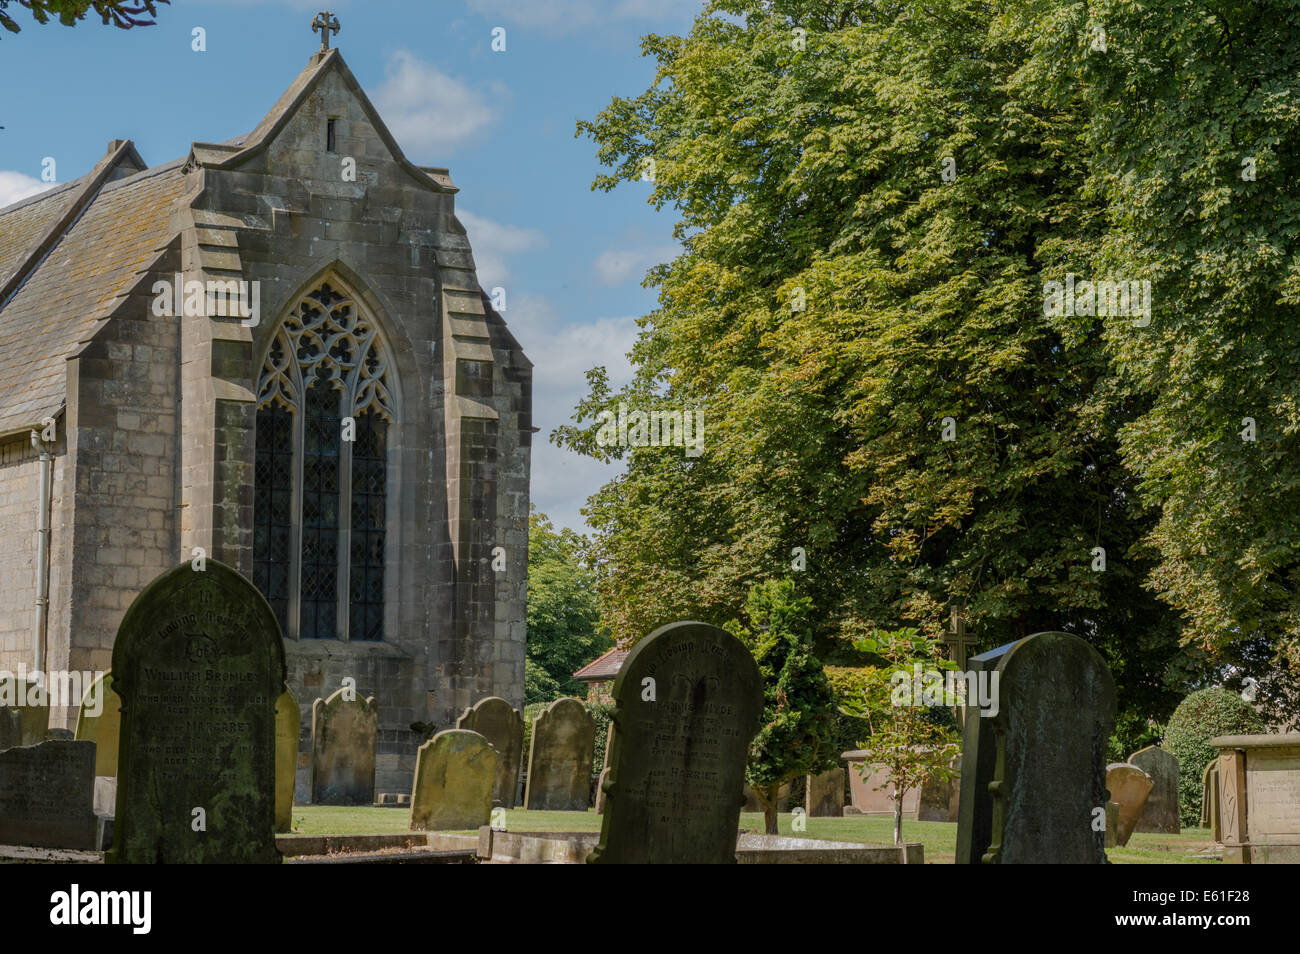 Church and graveyard in Little Driffield, East Yorkshire, England Stock Photo